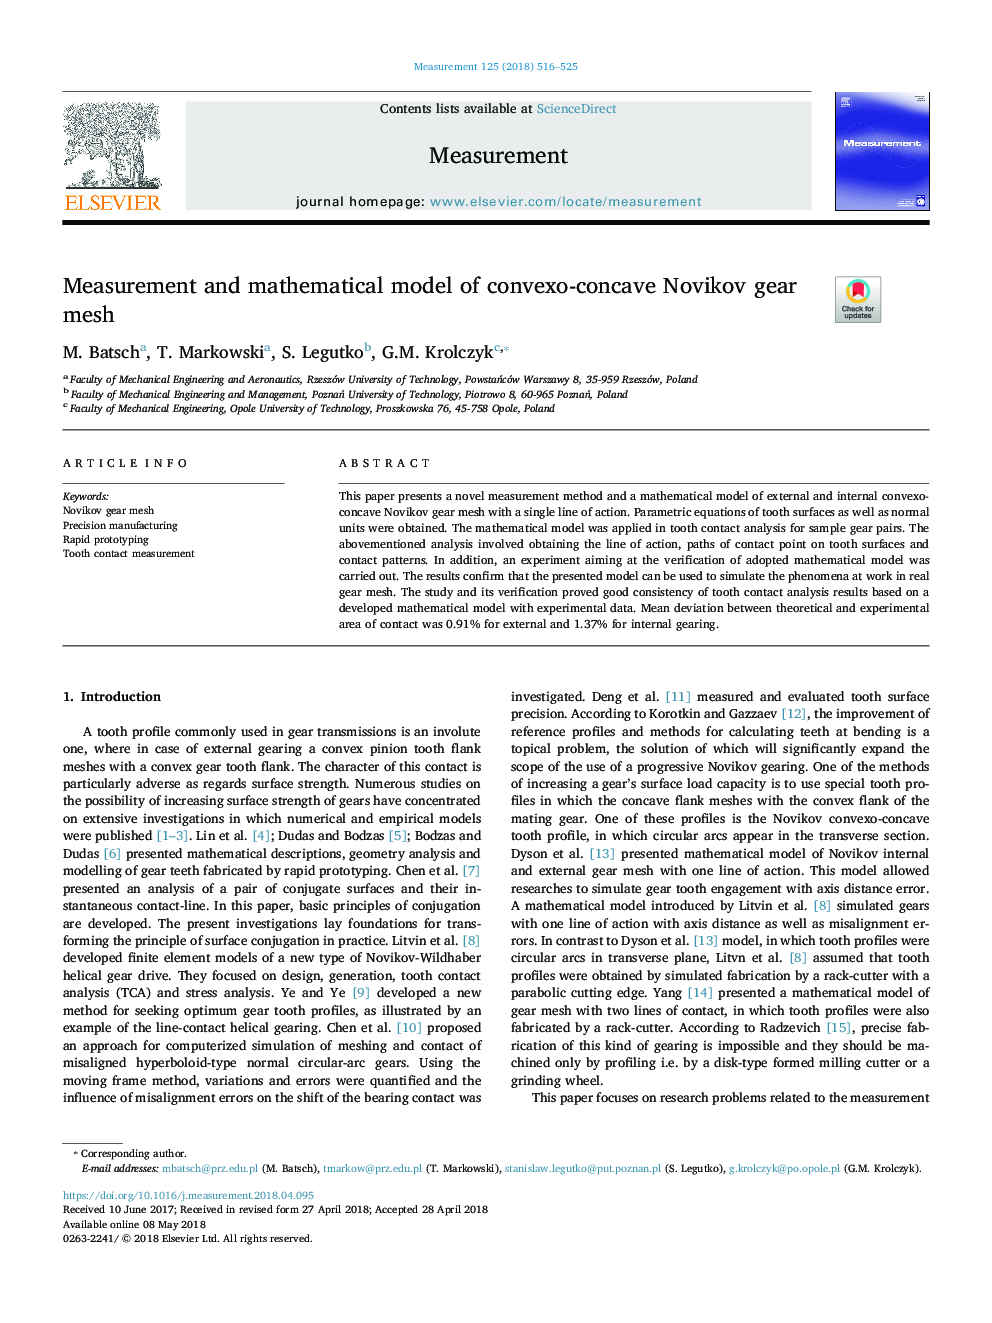 Measurement and mathematical model of convexo-concave Novikov gear mesh